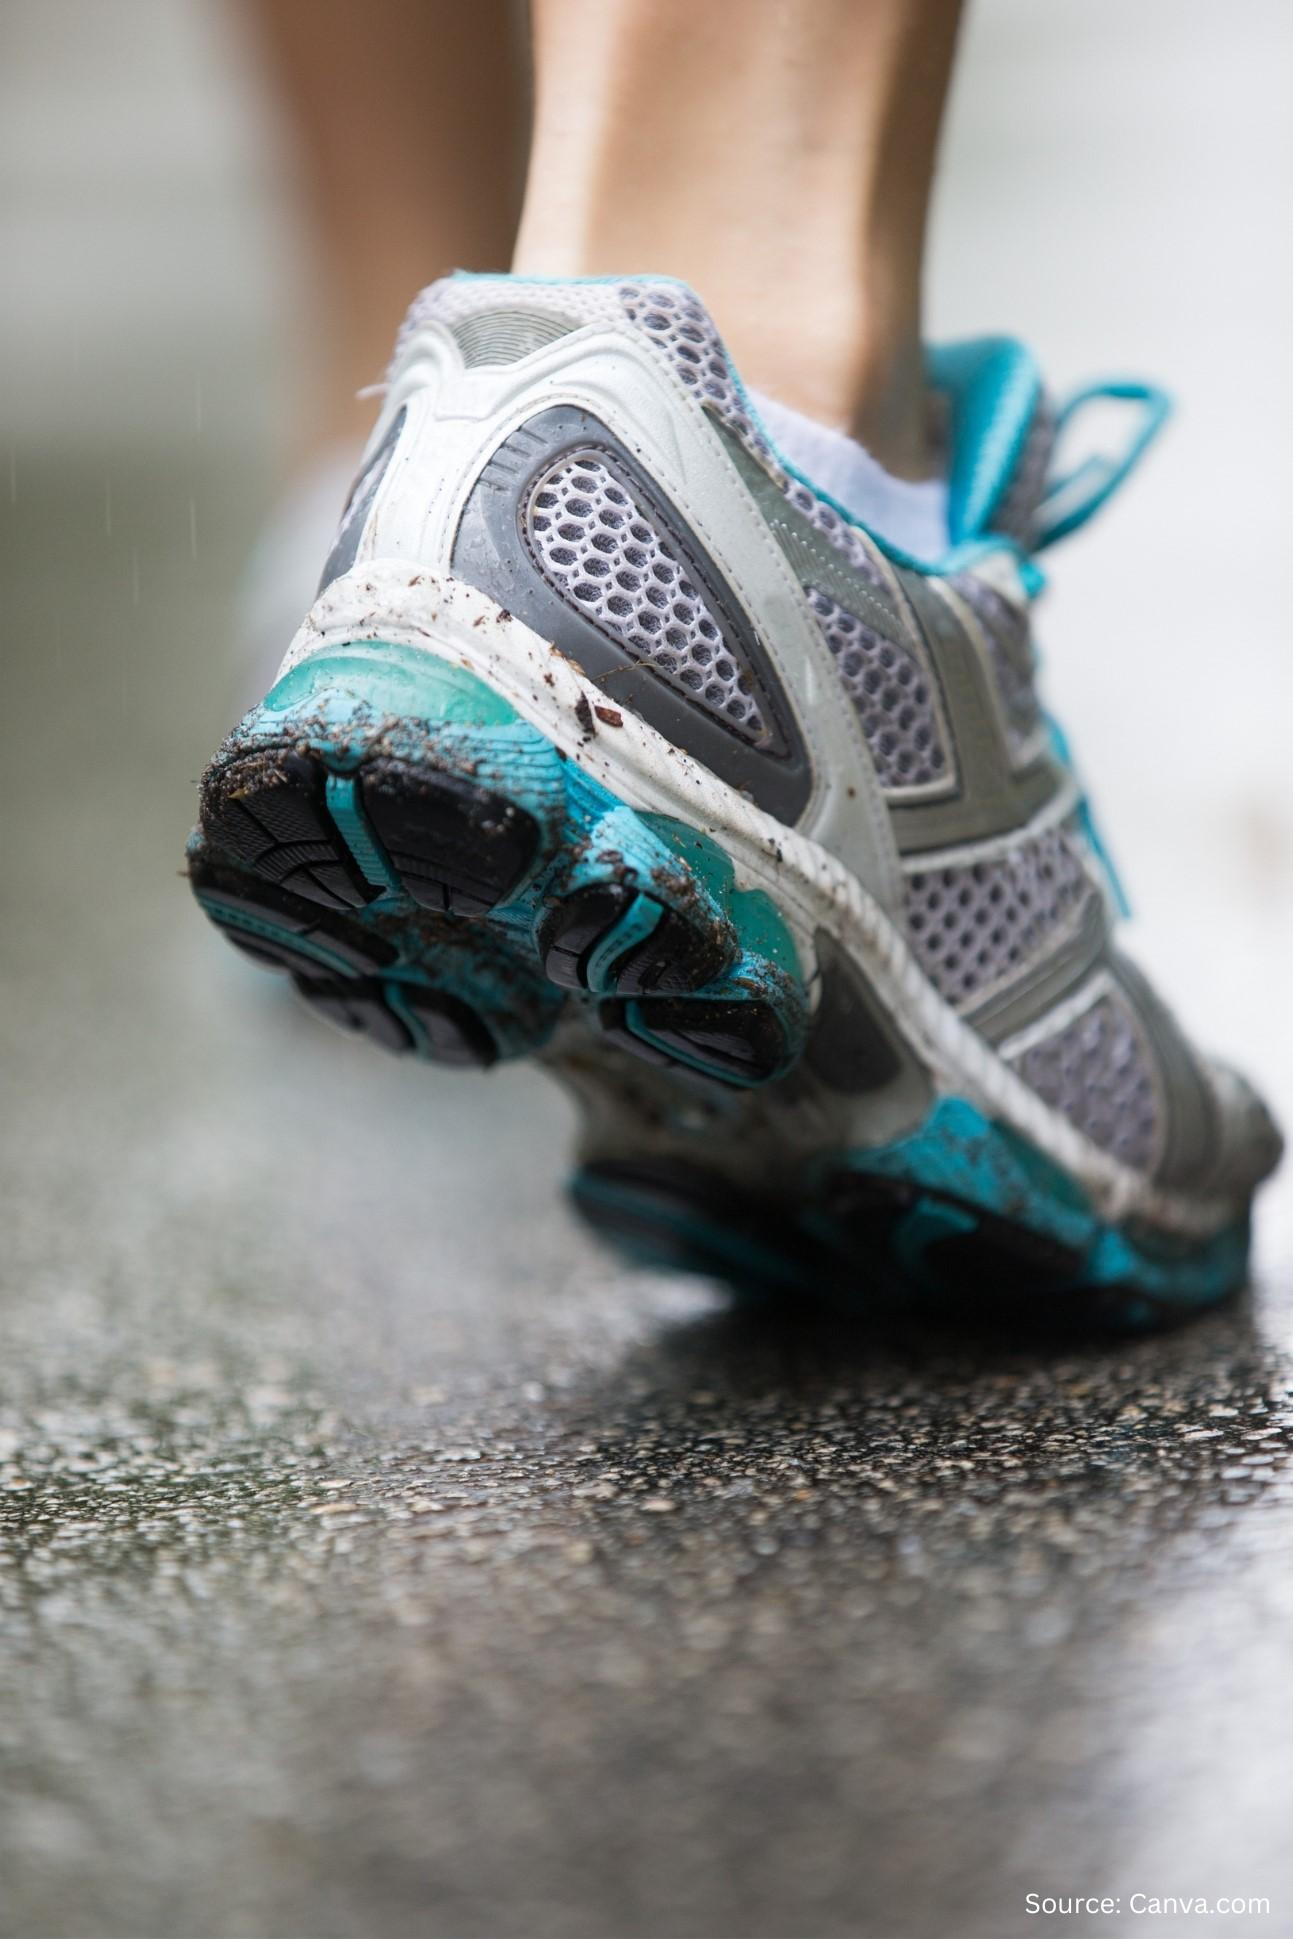 A human leg is wearing a grey and teal running sneaker.